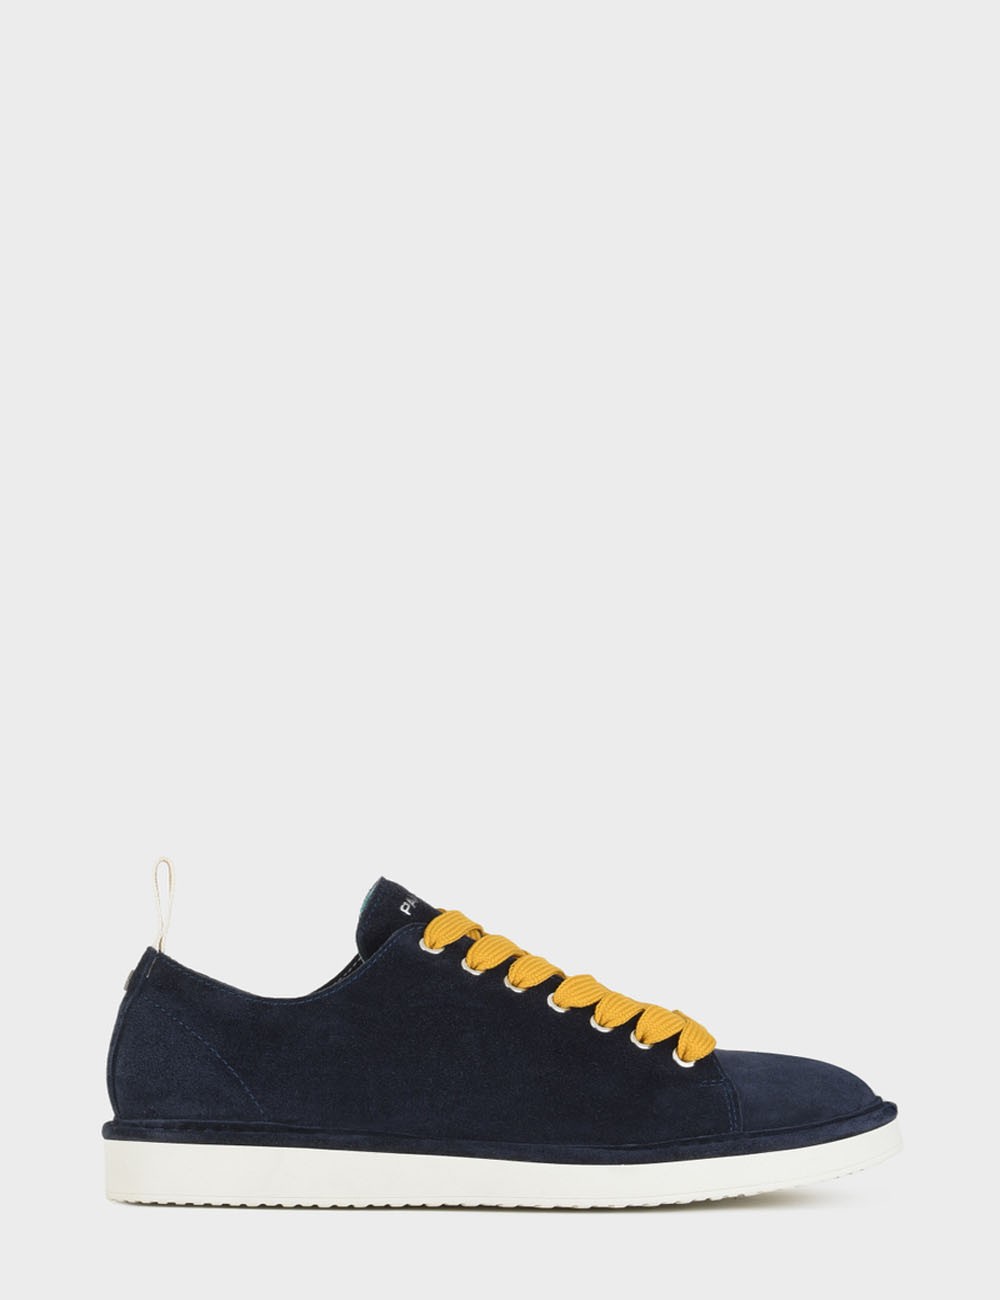 SNEAKERS P01 UOMO IN SUEDE NOTTE-GIALLO